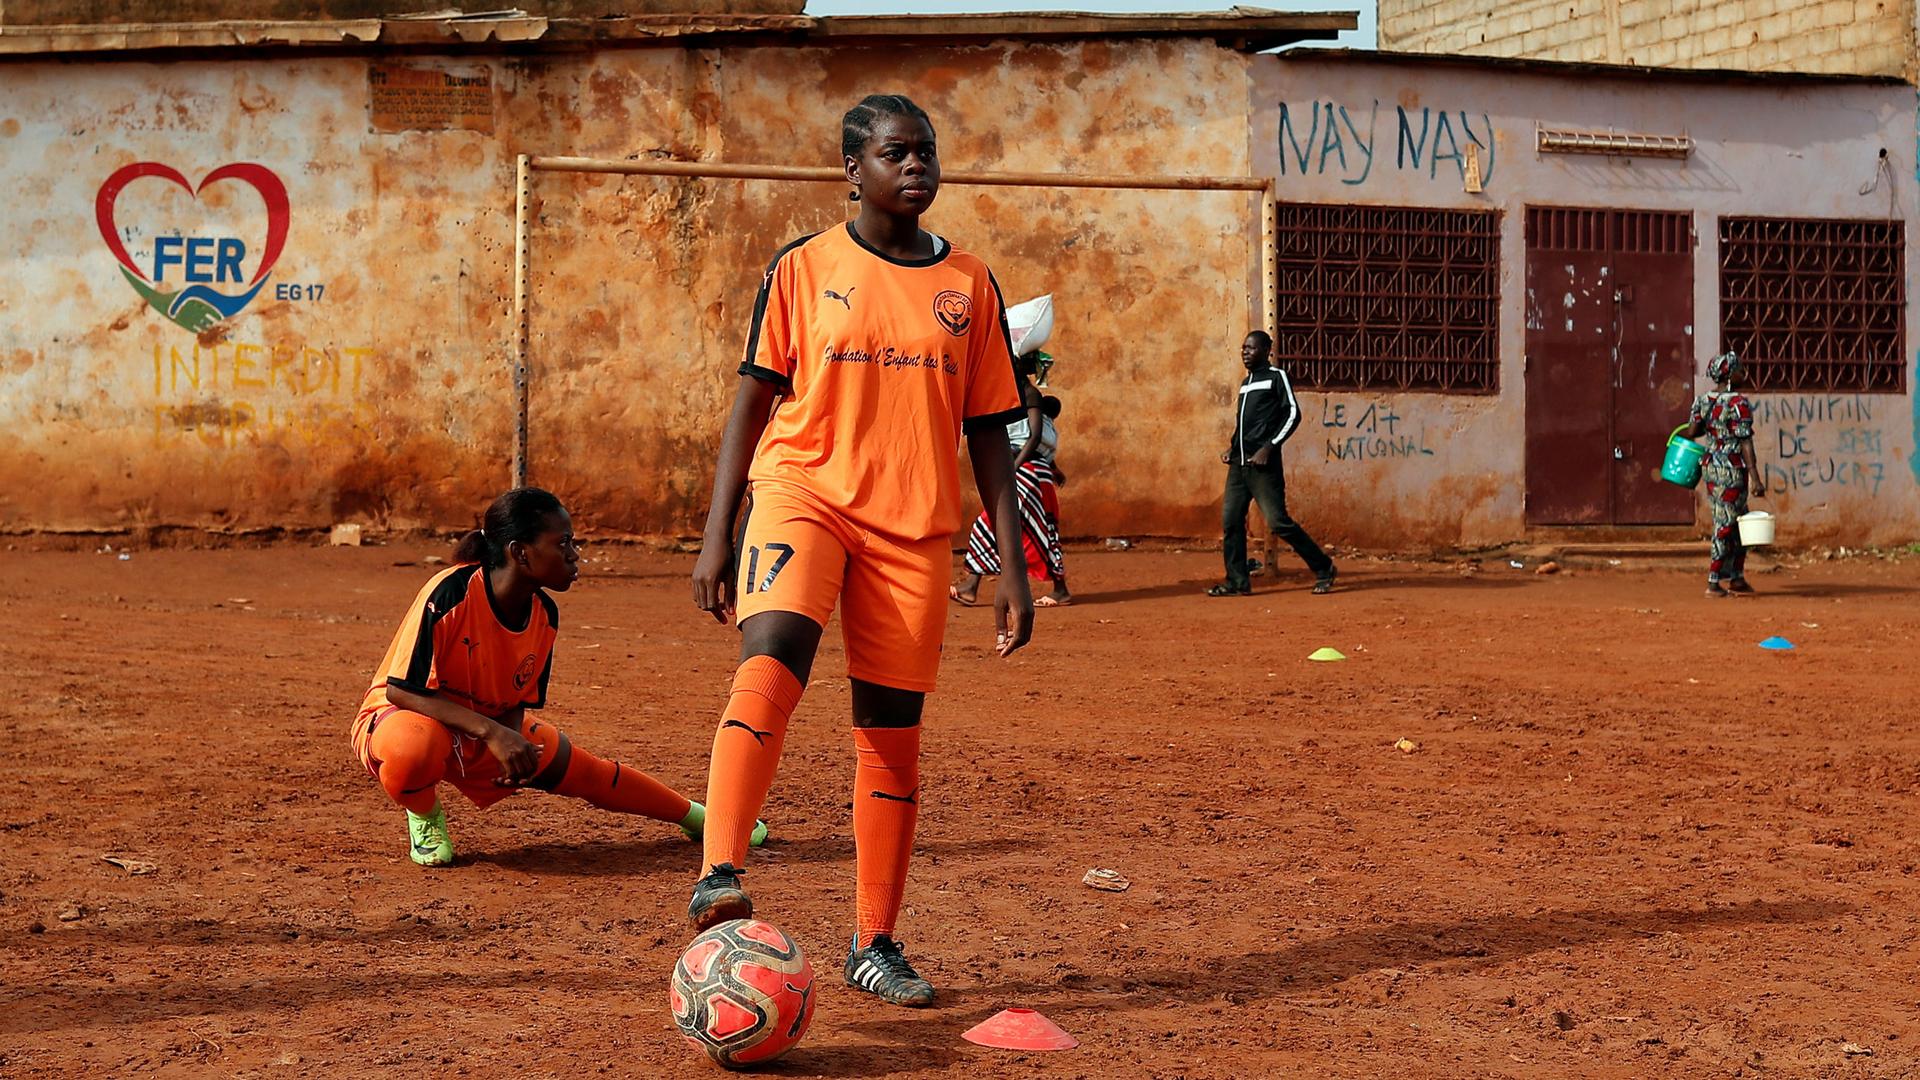 Gaelle Dule Asheri is shown standing with one foot on a soccer ball and wearing an orange uniform.